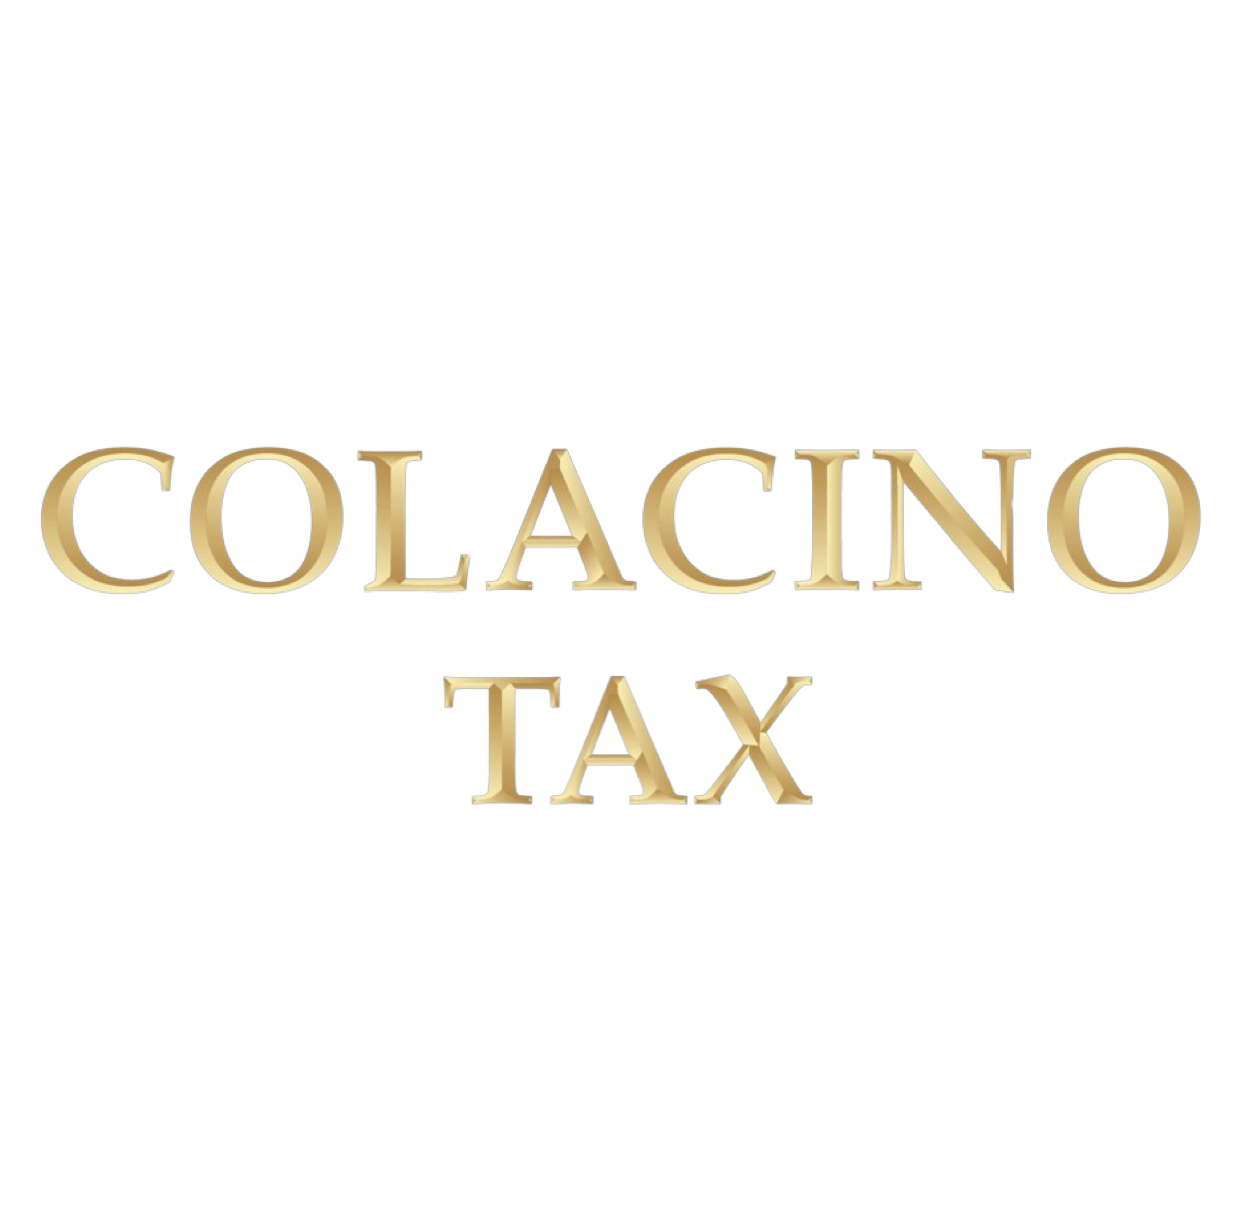 Colacino Tax.png